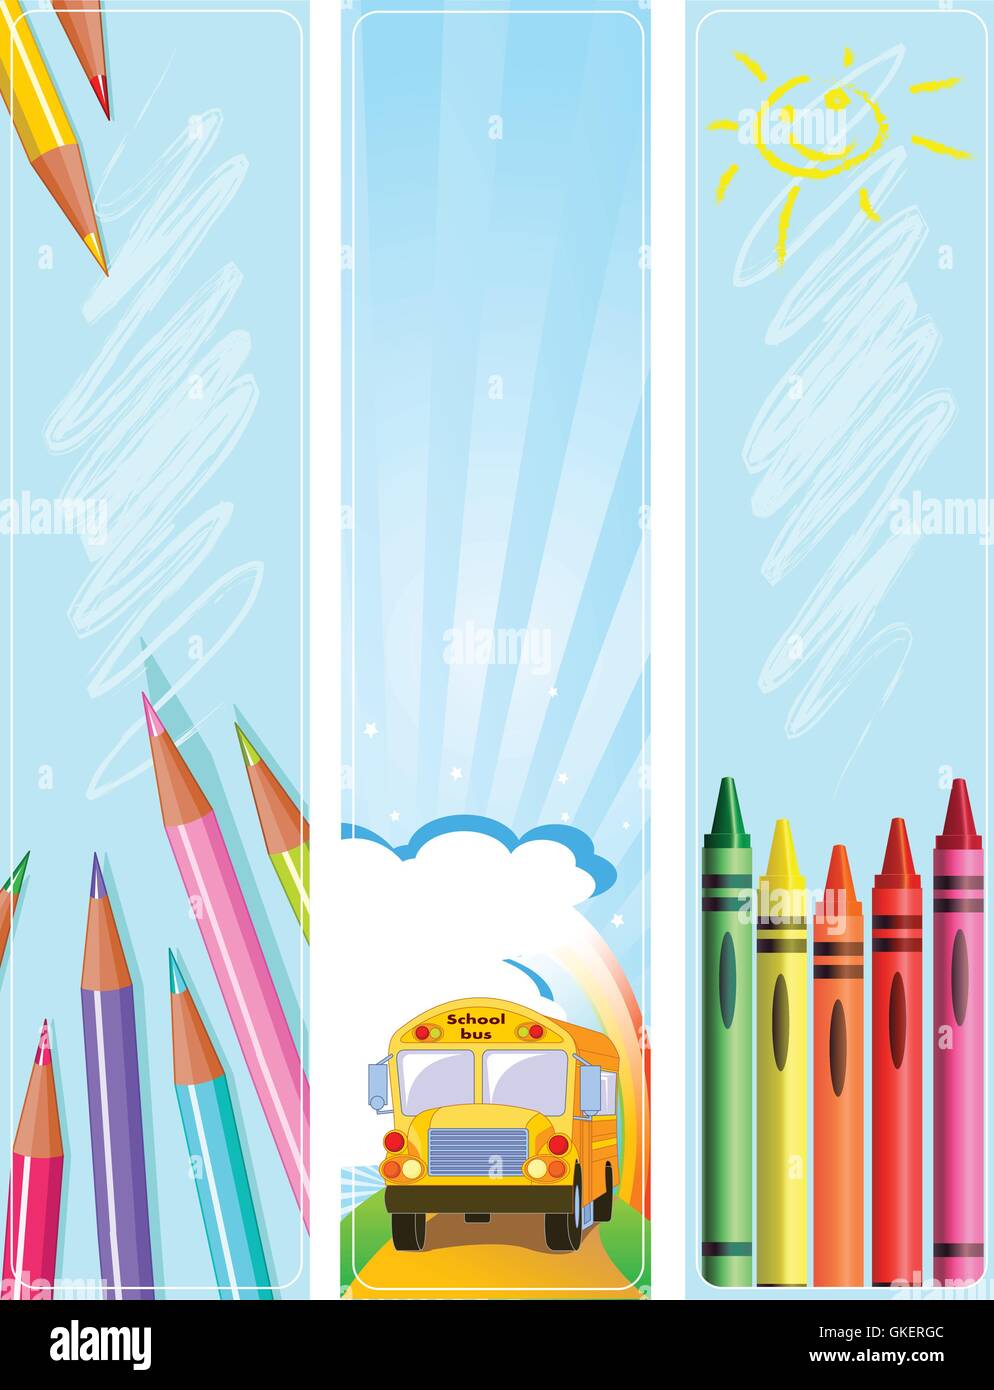 Back to school banners Stock Vector